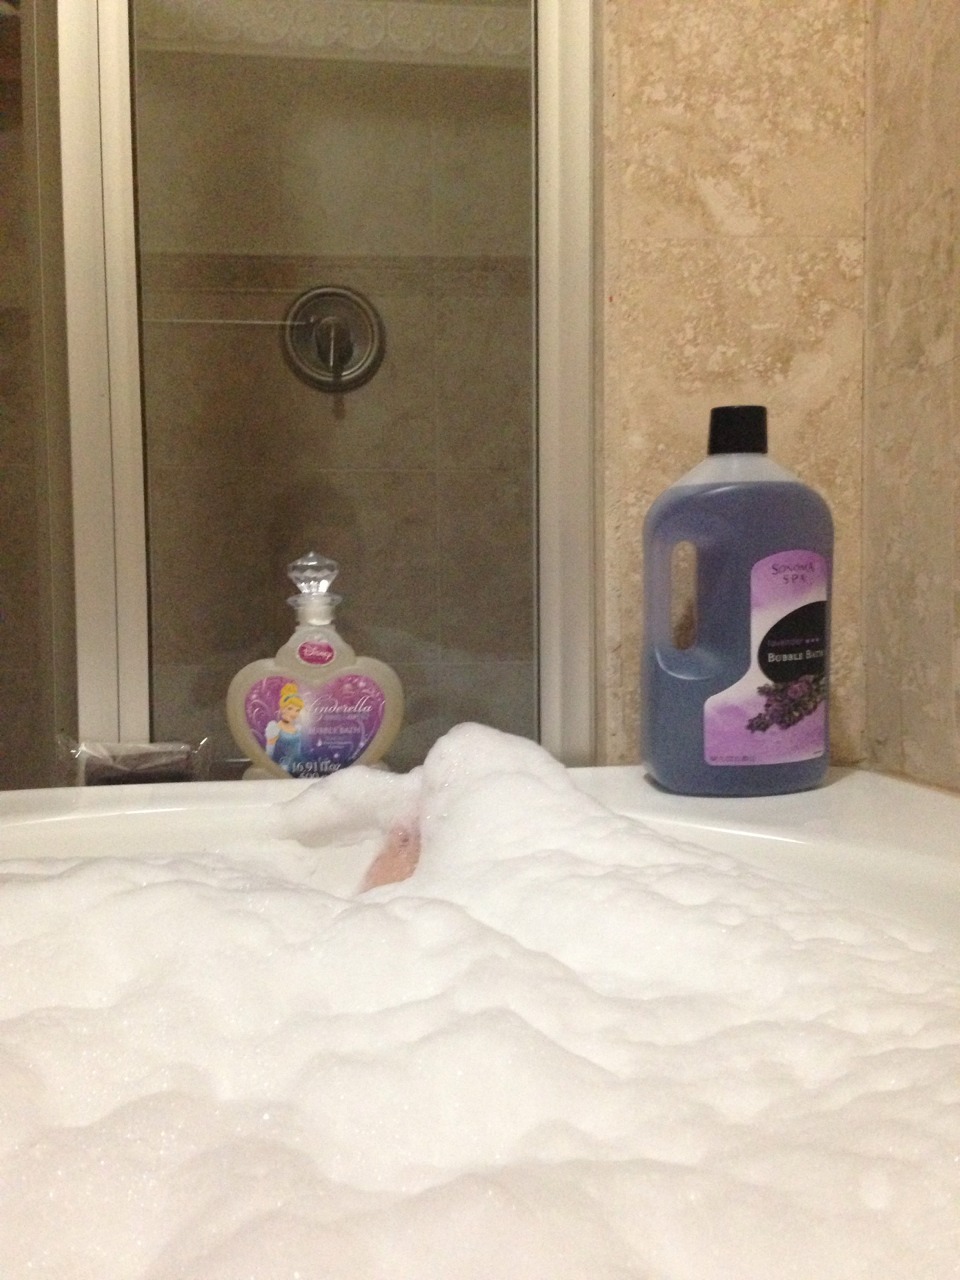 Bubble bath time is the best time. ^_^